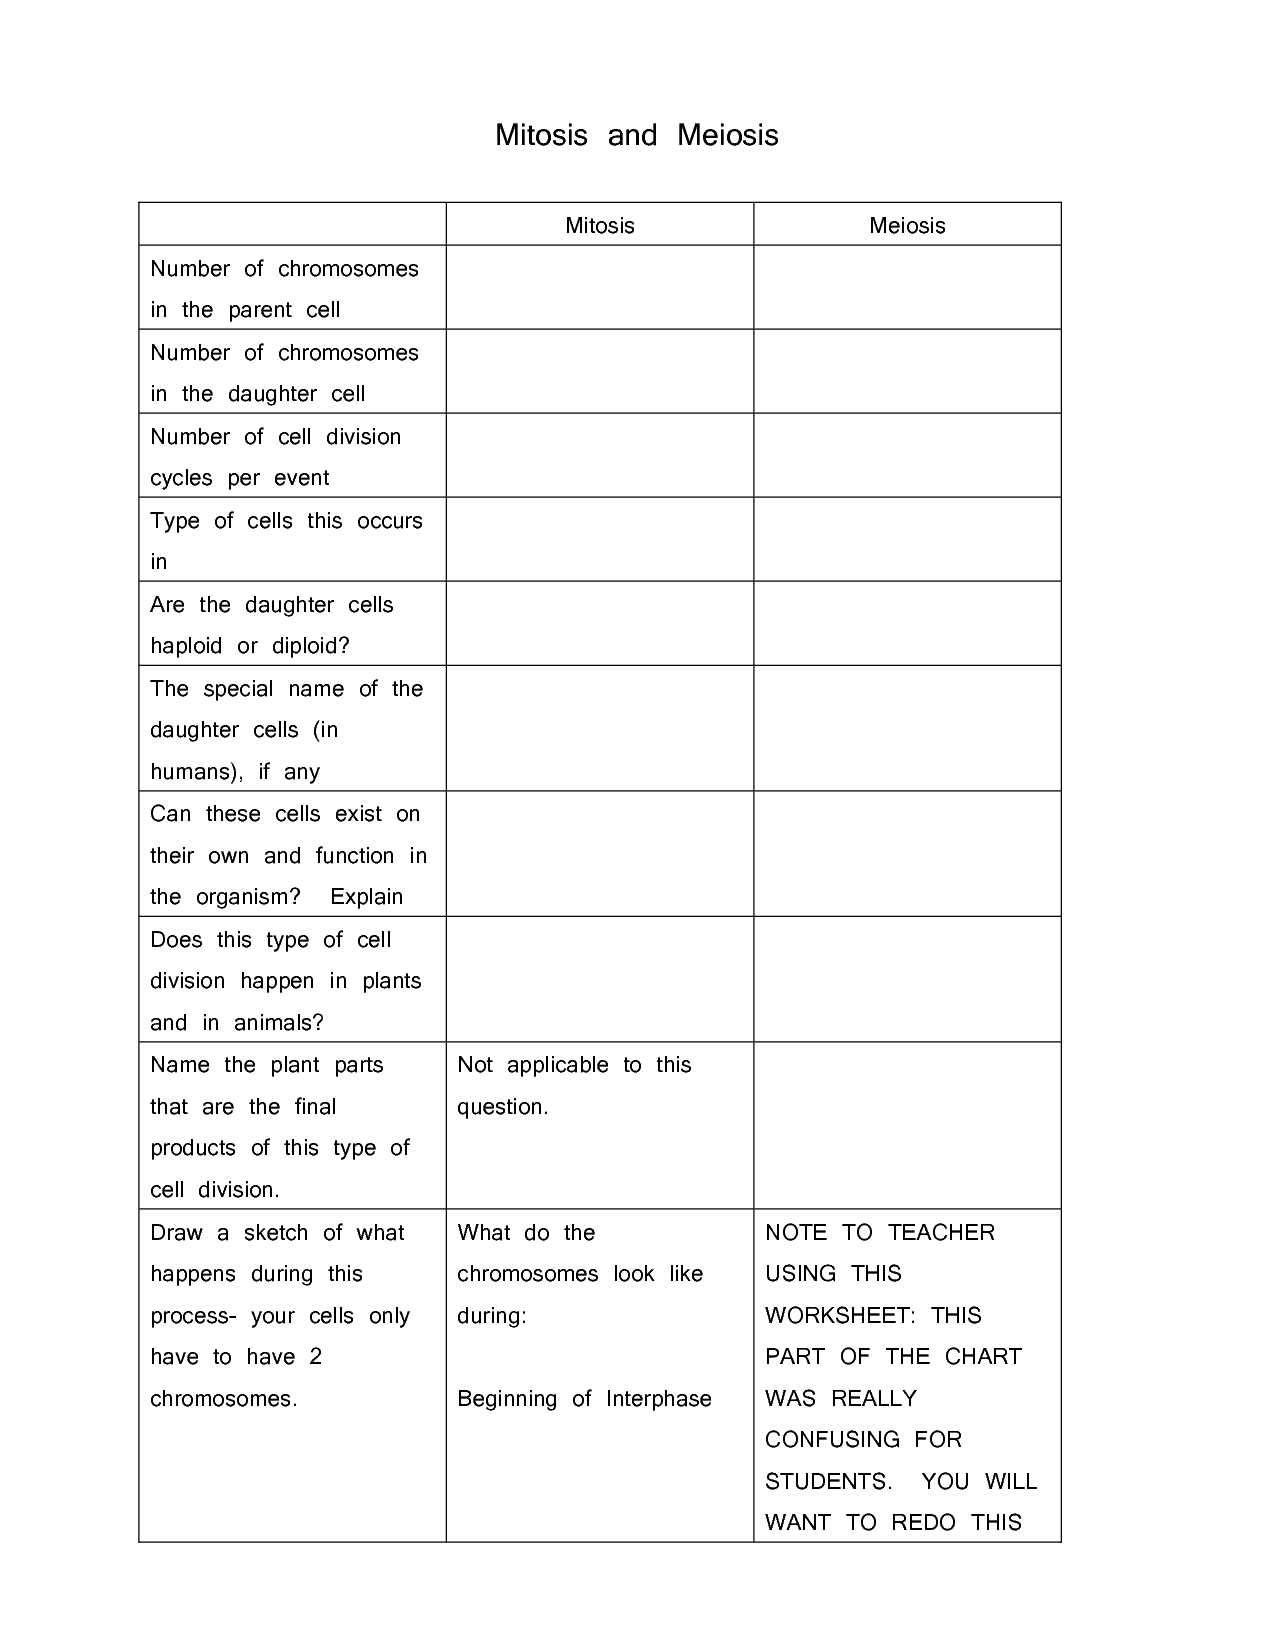 15-best-images-of-mitosis-vs-meiosis-worksheet-answers-comparing